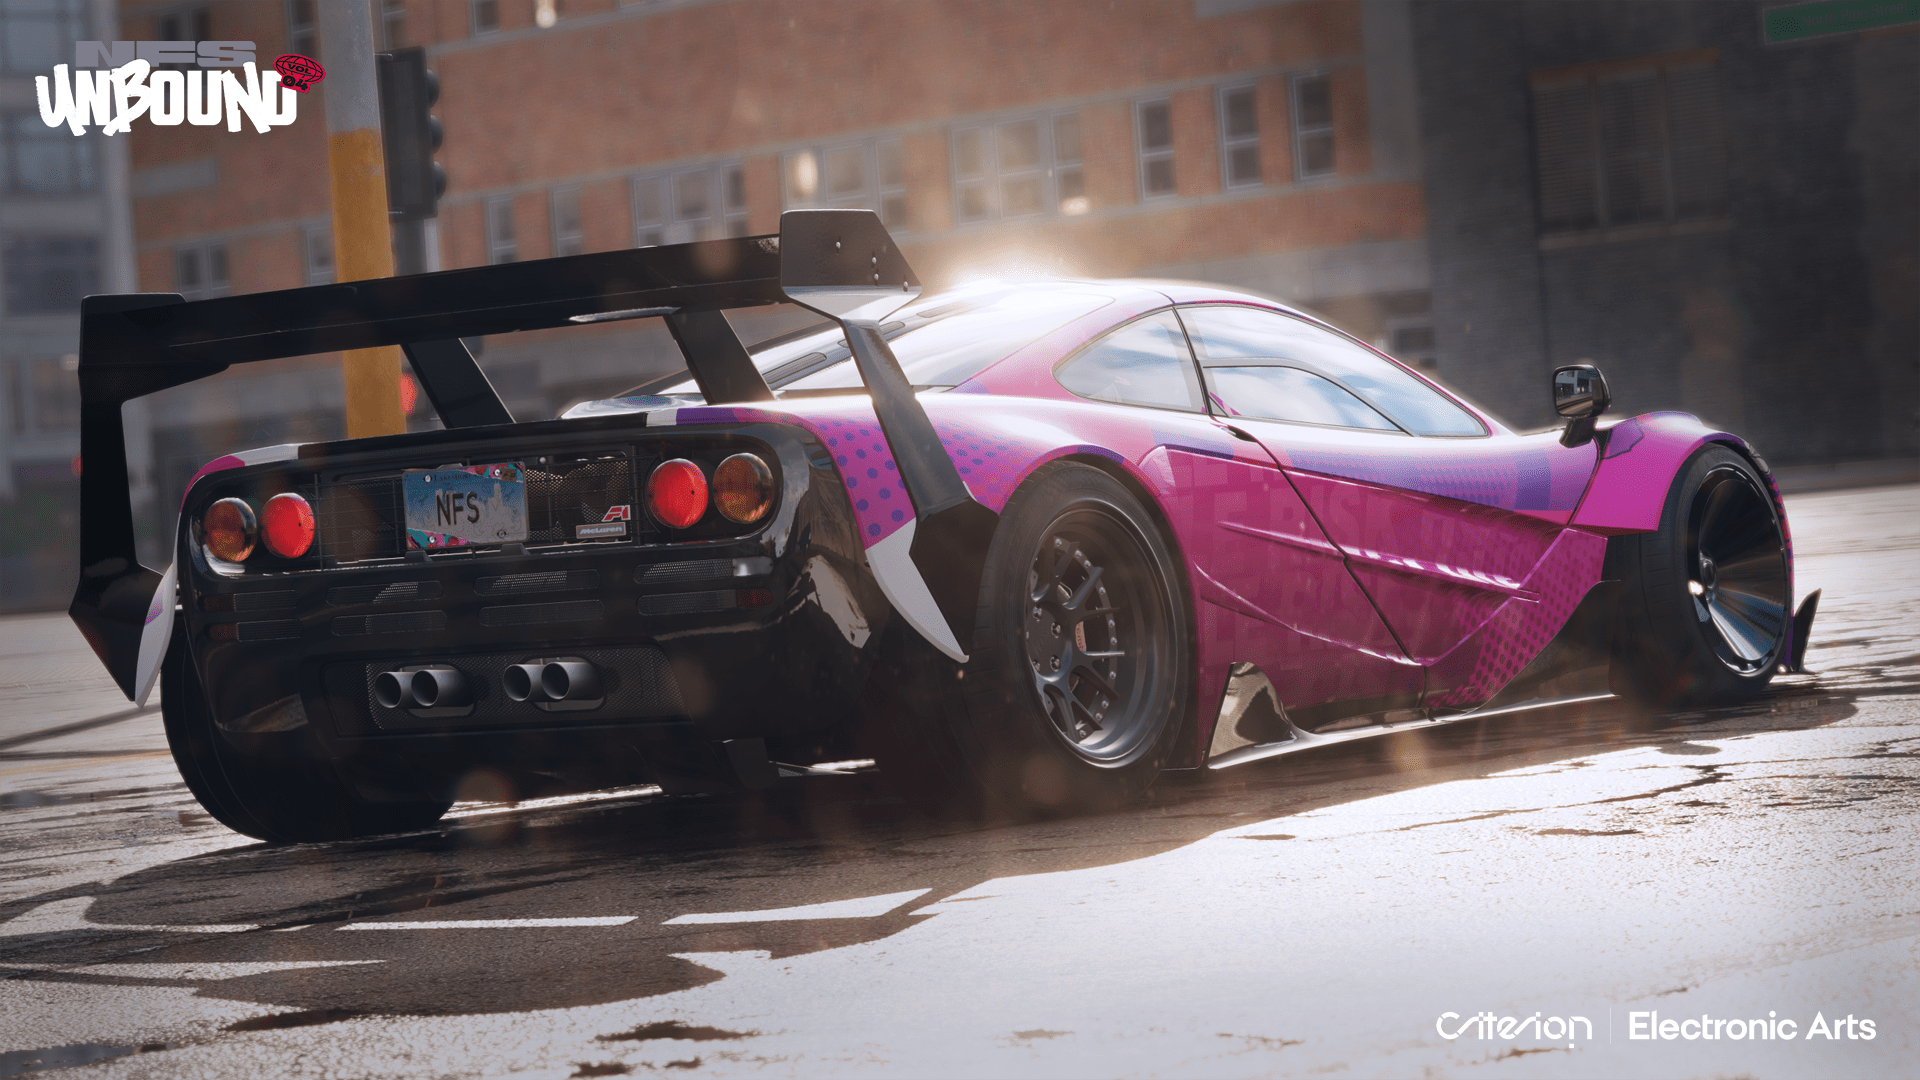 NFS - Need for Speed Unbound Vol 4